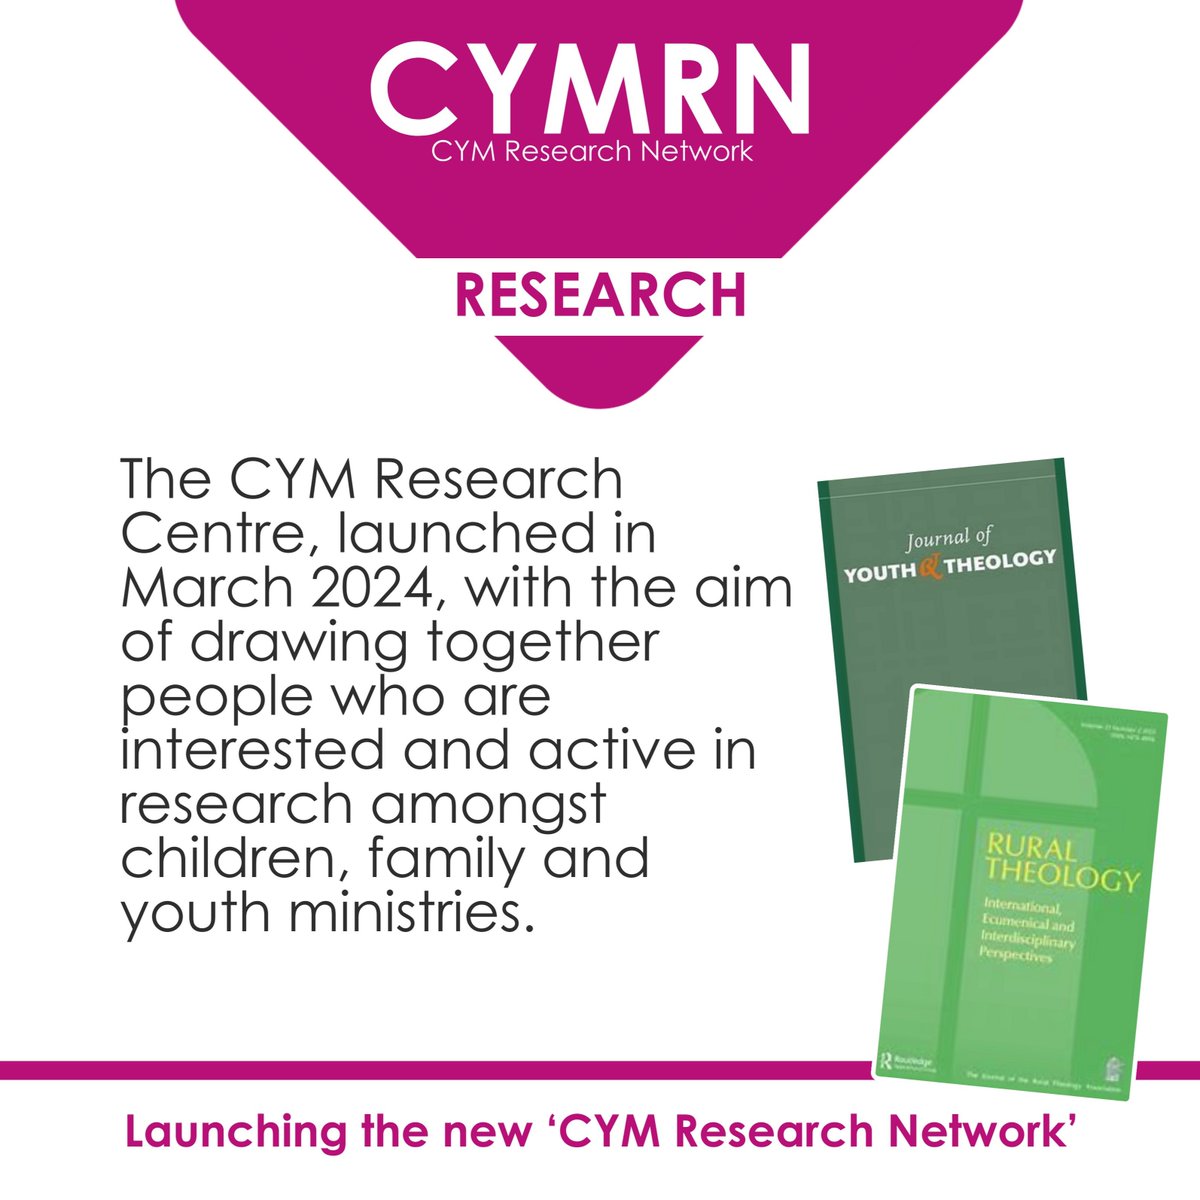 Launching our new CYM Research Centre & CYM Research Network! The CYM Research Centre launched in March 2024, with the aim of drawing together people who are interested and active in research amongst children, family and youth ministries. Sign up through the link in the bio